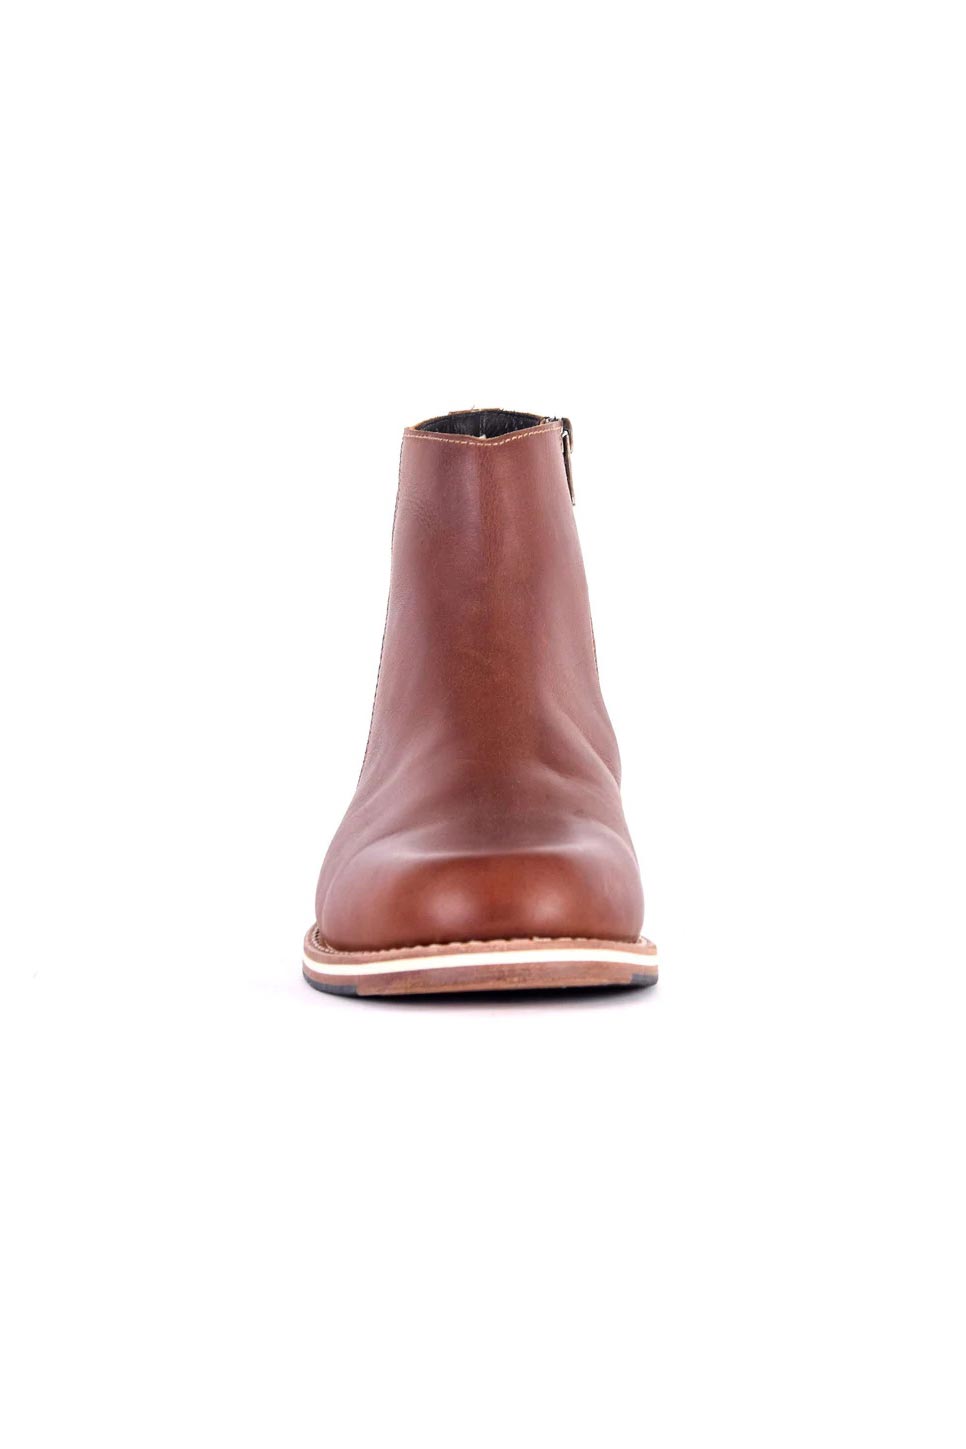 Helm Boots - The Pablo - Brown - Front